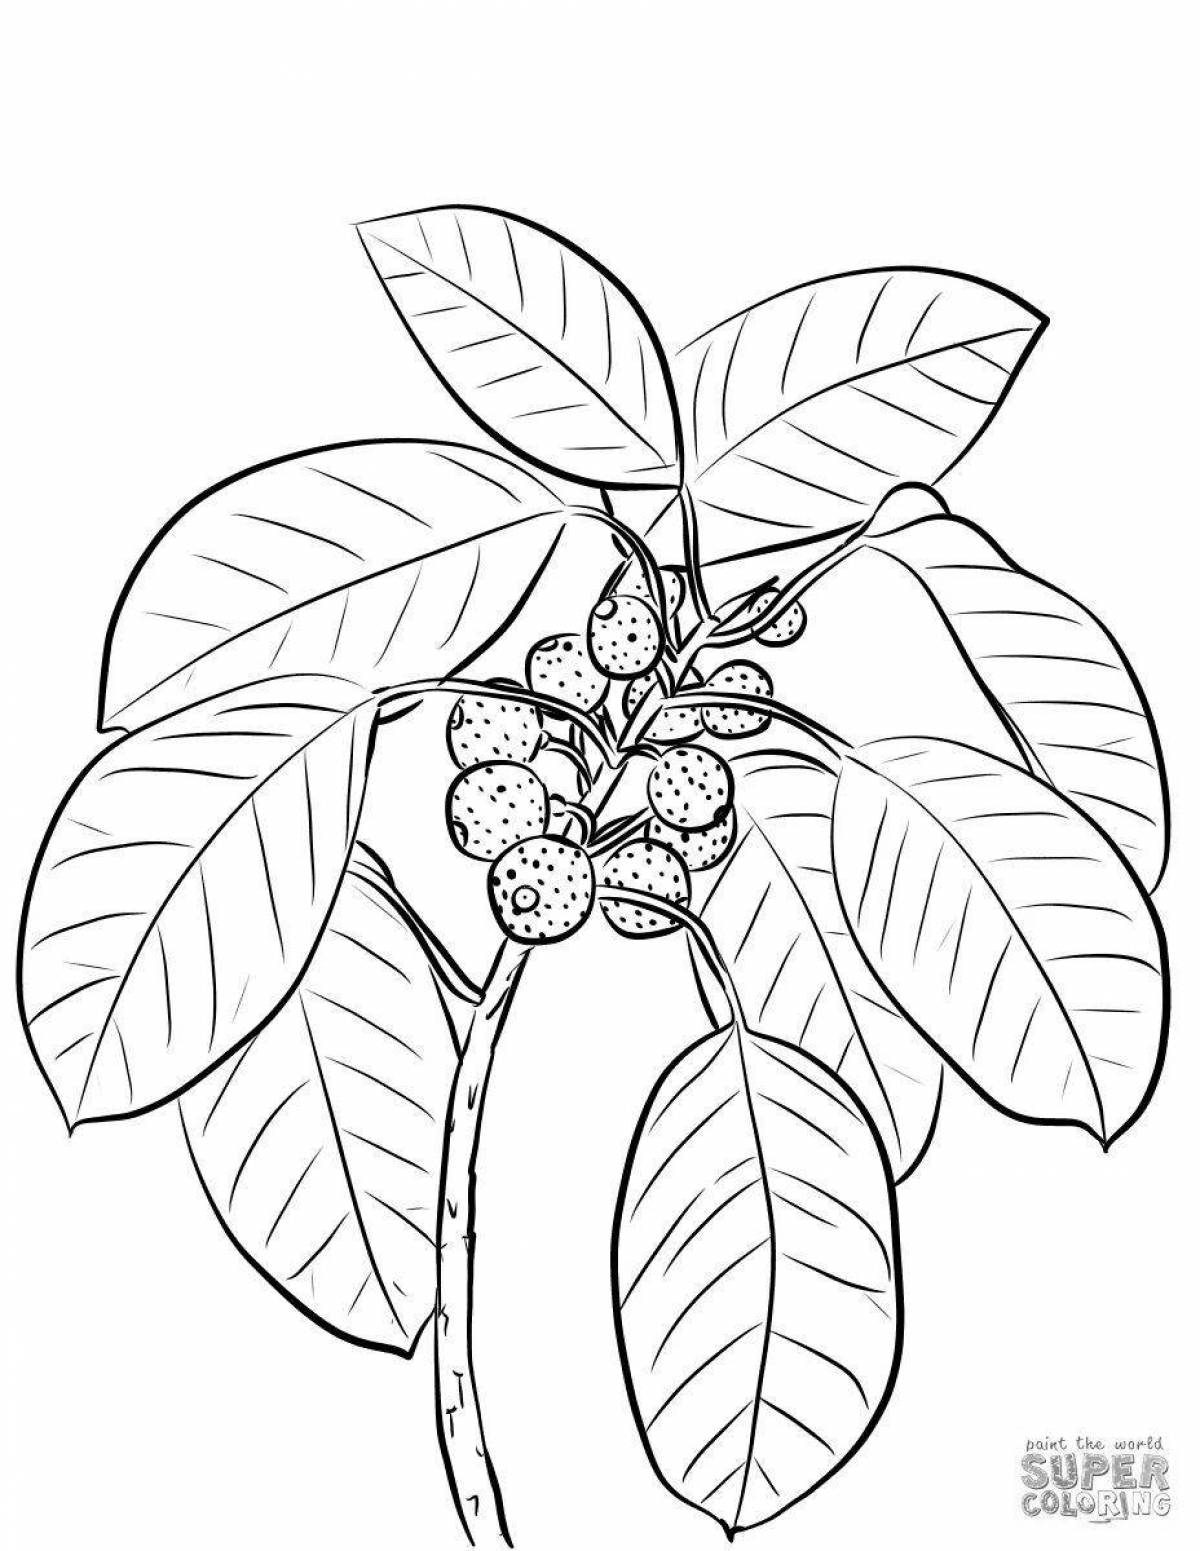 Gorgeous ficus coloring book for kids